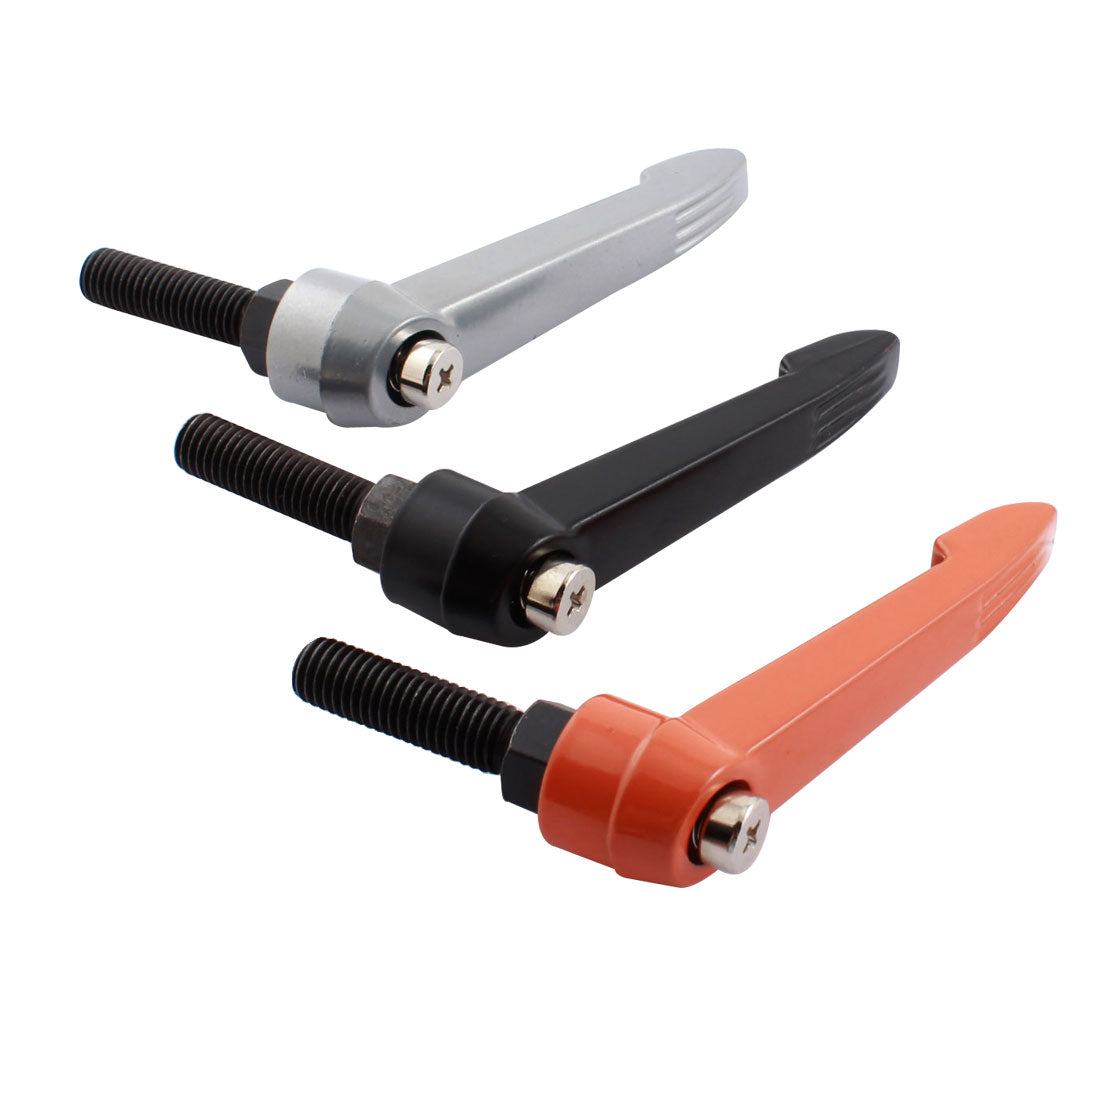 uxcell Uxcell 3PCS M10x35mm Male Thread 90mm Long Clamping Lever Orange Black Siver Tone Metal Adjustable Knob Grip Handle for Machinery